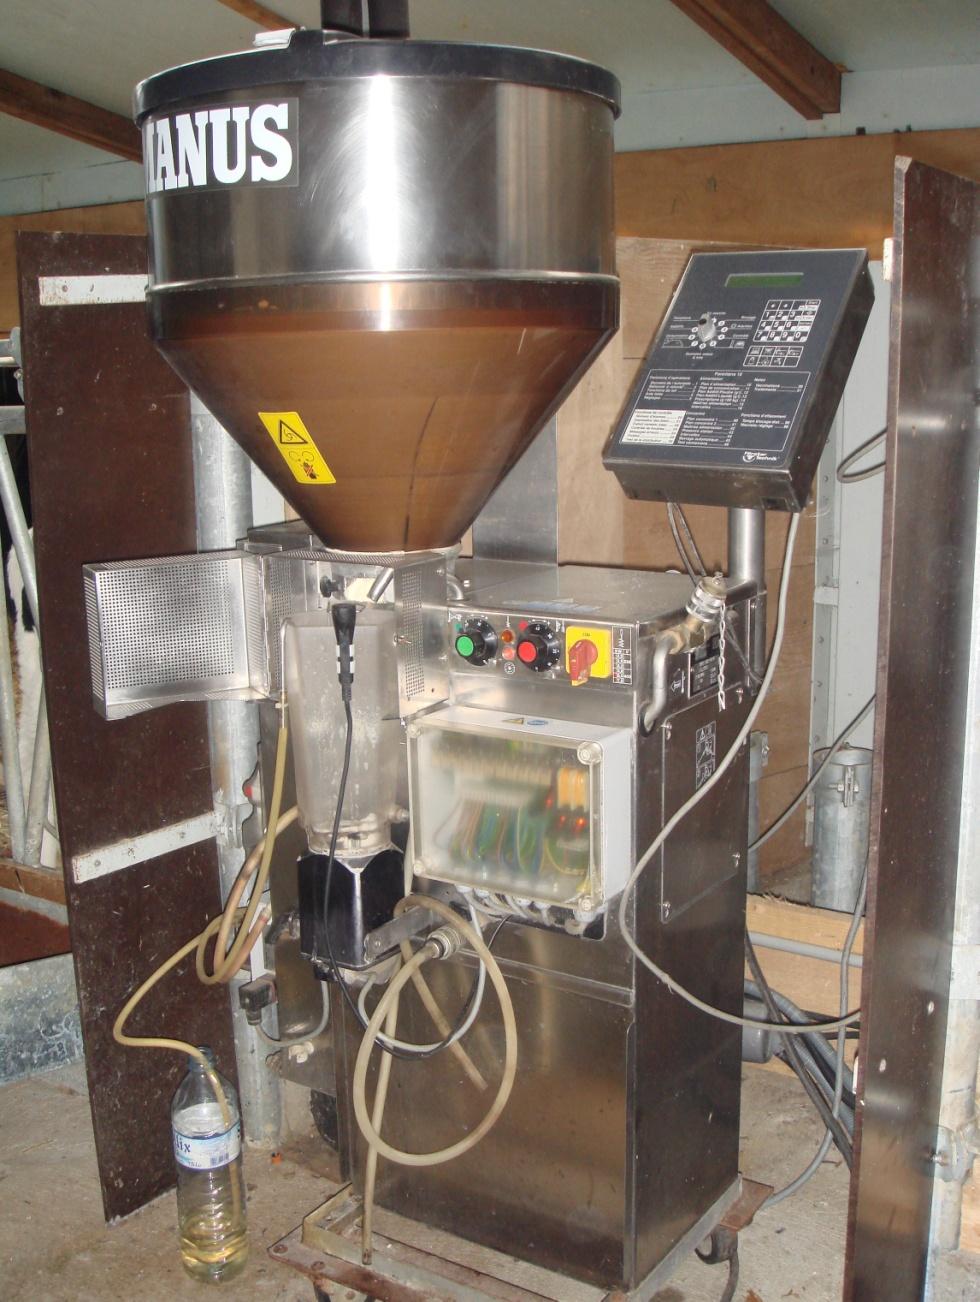 Automatic feeders (ex : for calves as this one) must be adapted to ISO standard